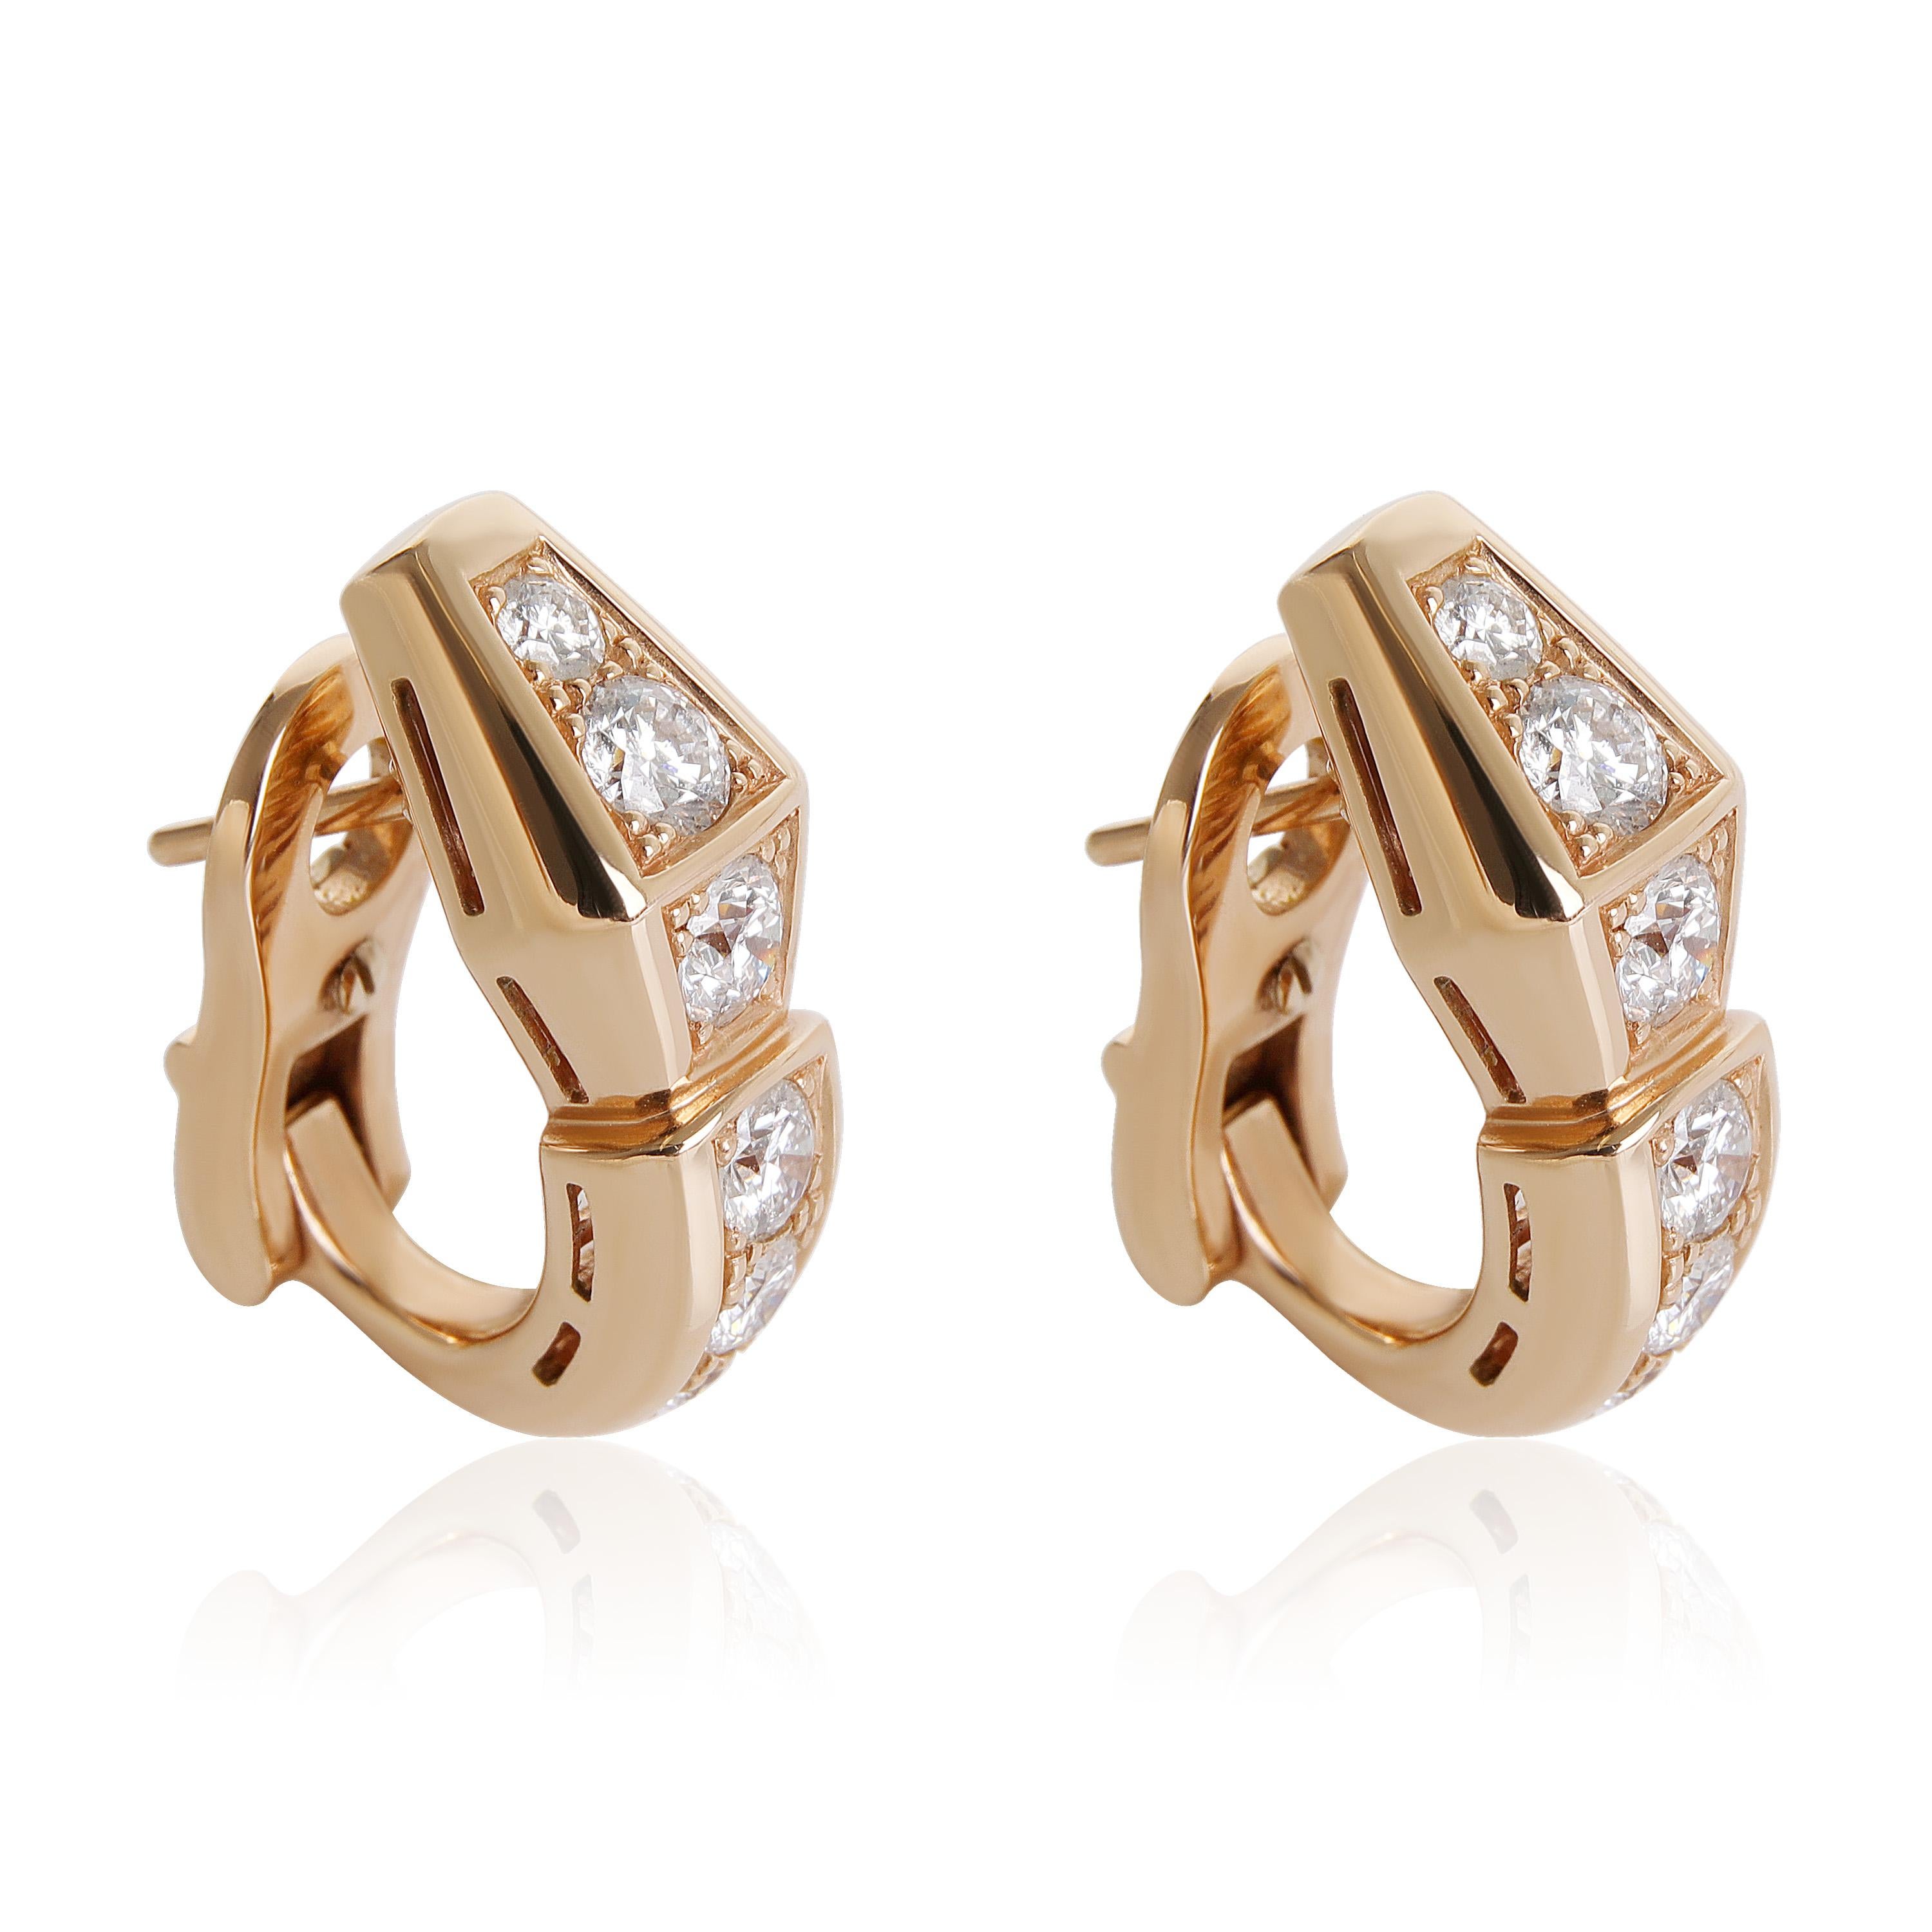 BVLGARI Serpenti Viper Diamond Earrings in 18K Rose Gold

PRIMARY DETAILS
SKU: 121052
Listing Title: BVLGARI Serpenti Viper Diamond Earrings in 18K Rose Gold
Condition Description: Retails for 14500 USD. In excellent condition. Comes with